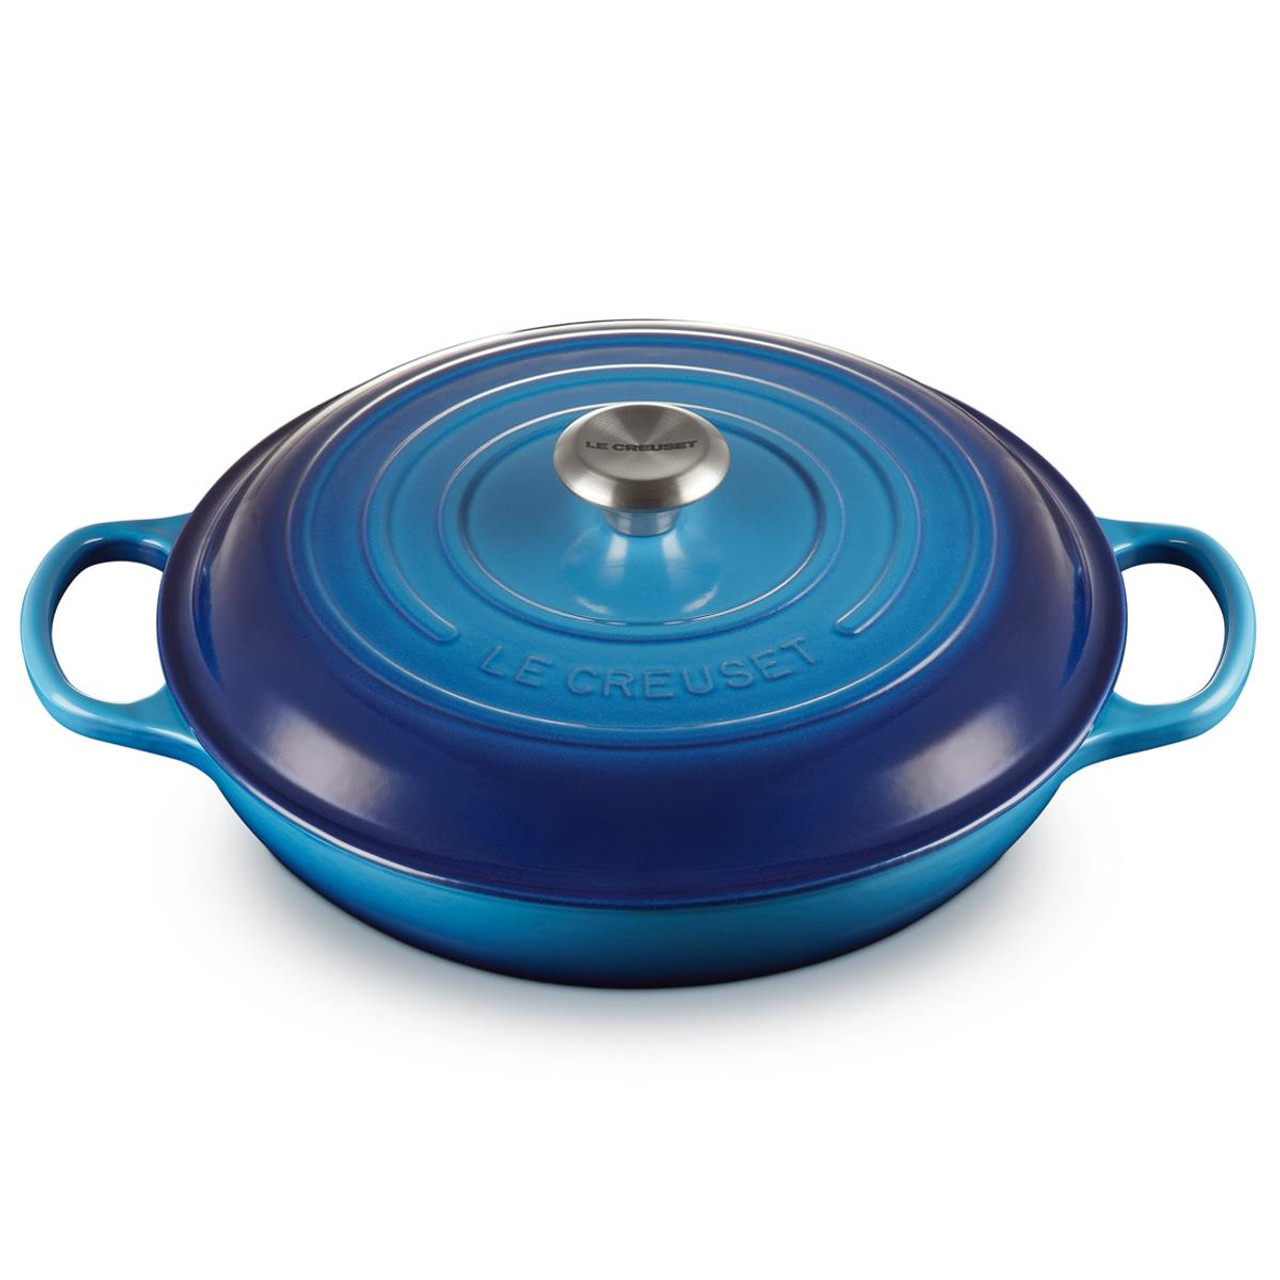 What is the reputation of Le Creuset 30cm Cast Iron Shallow Casserole Dish?